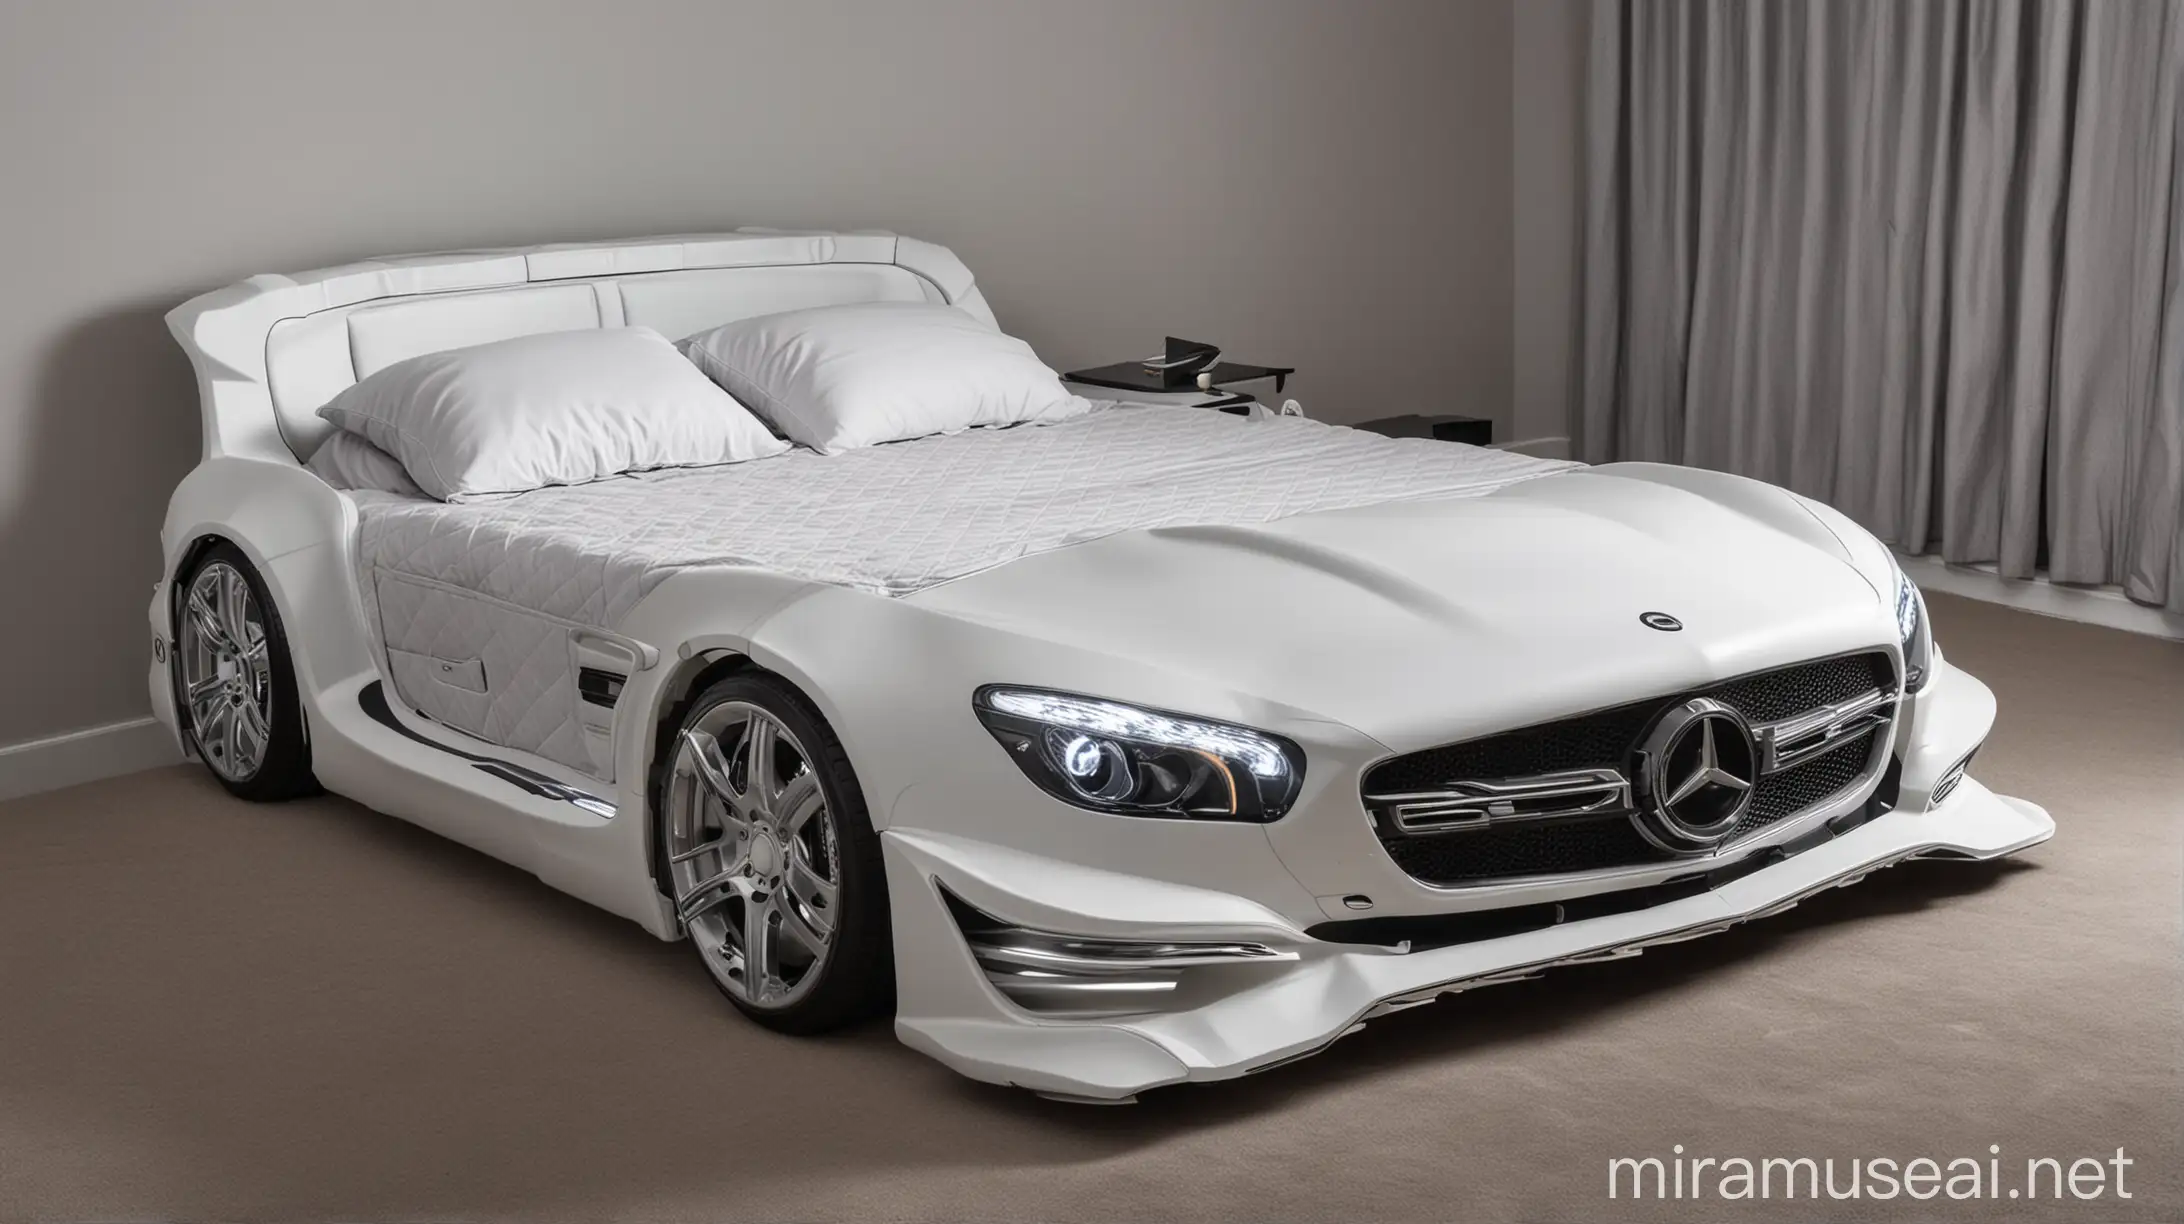 Luxury Double Bed Shaped Like a Mercedes AMG Car with Illuminated Headlights